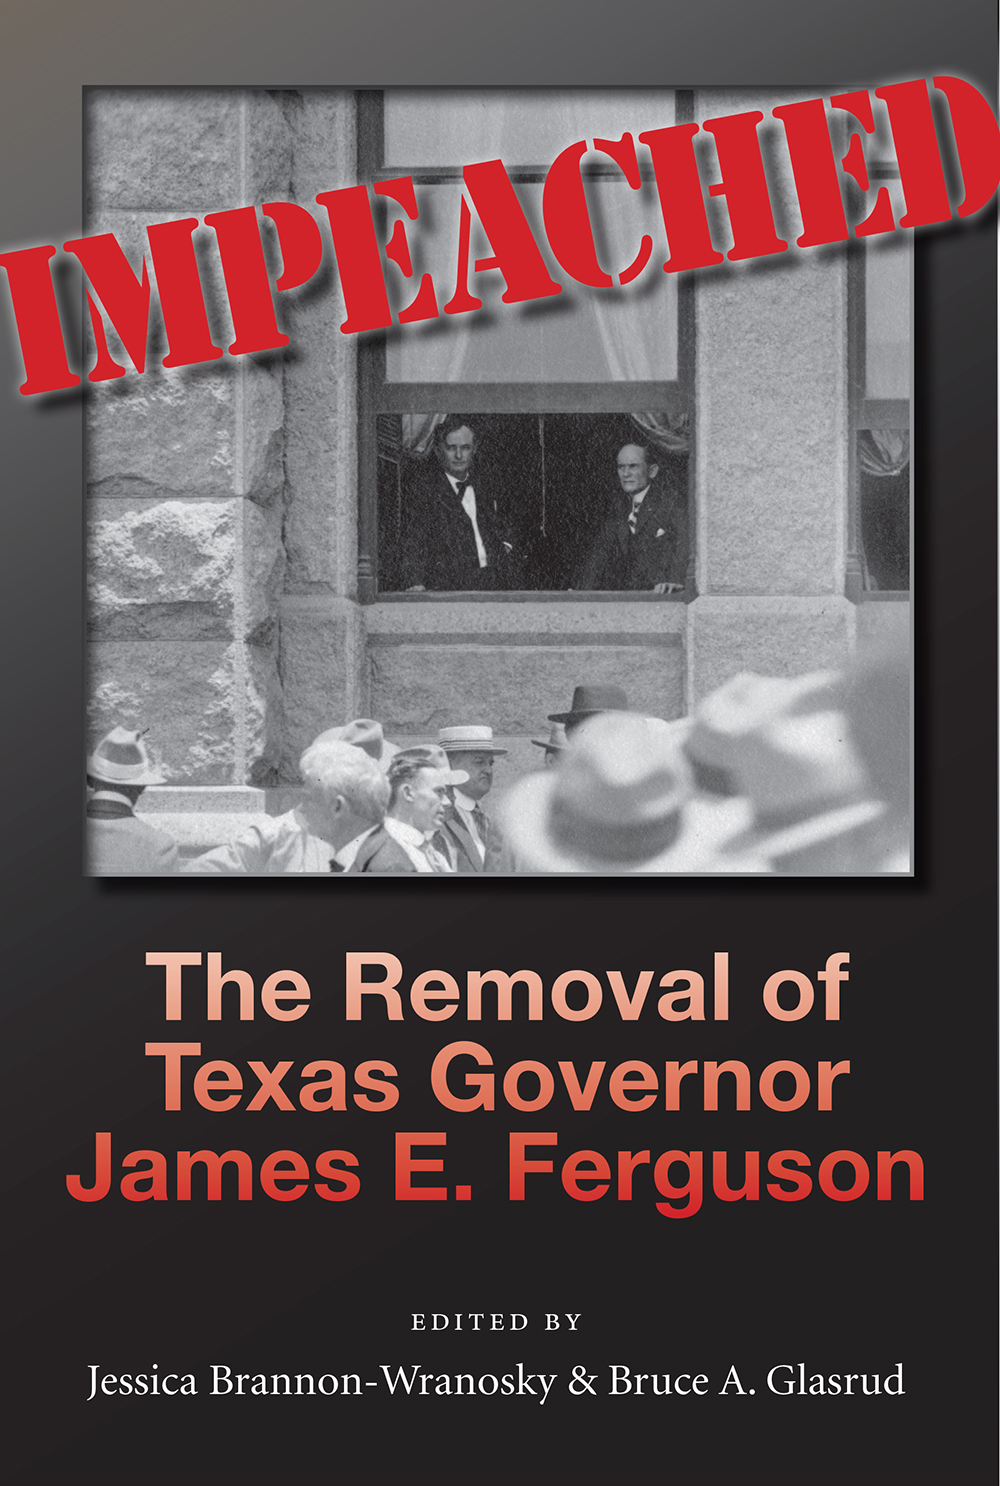 Jacket cover of Impeached